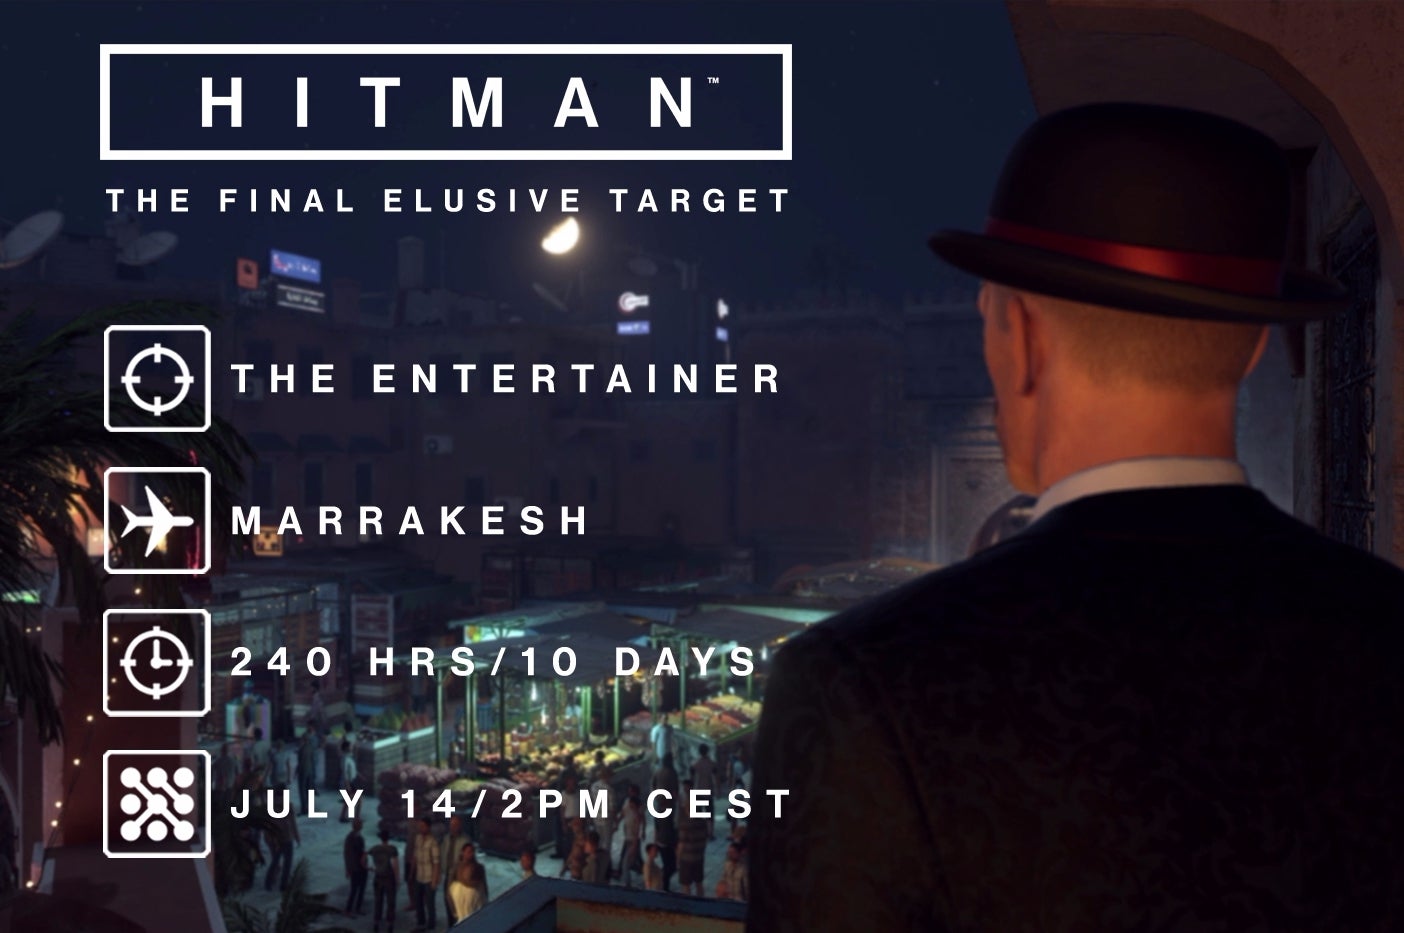 Image for Hitman's final Elusive Target premieres Friday